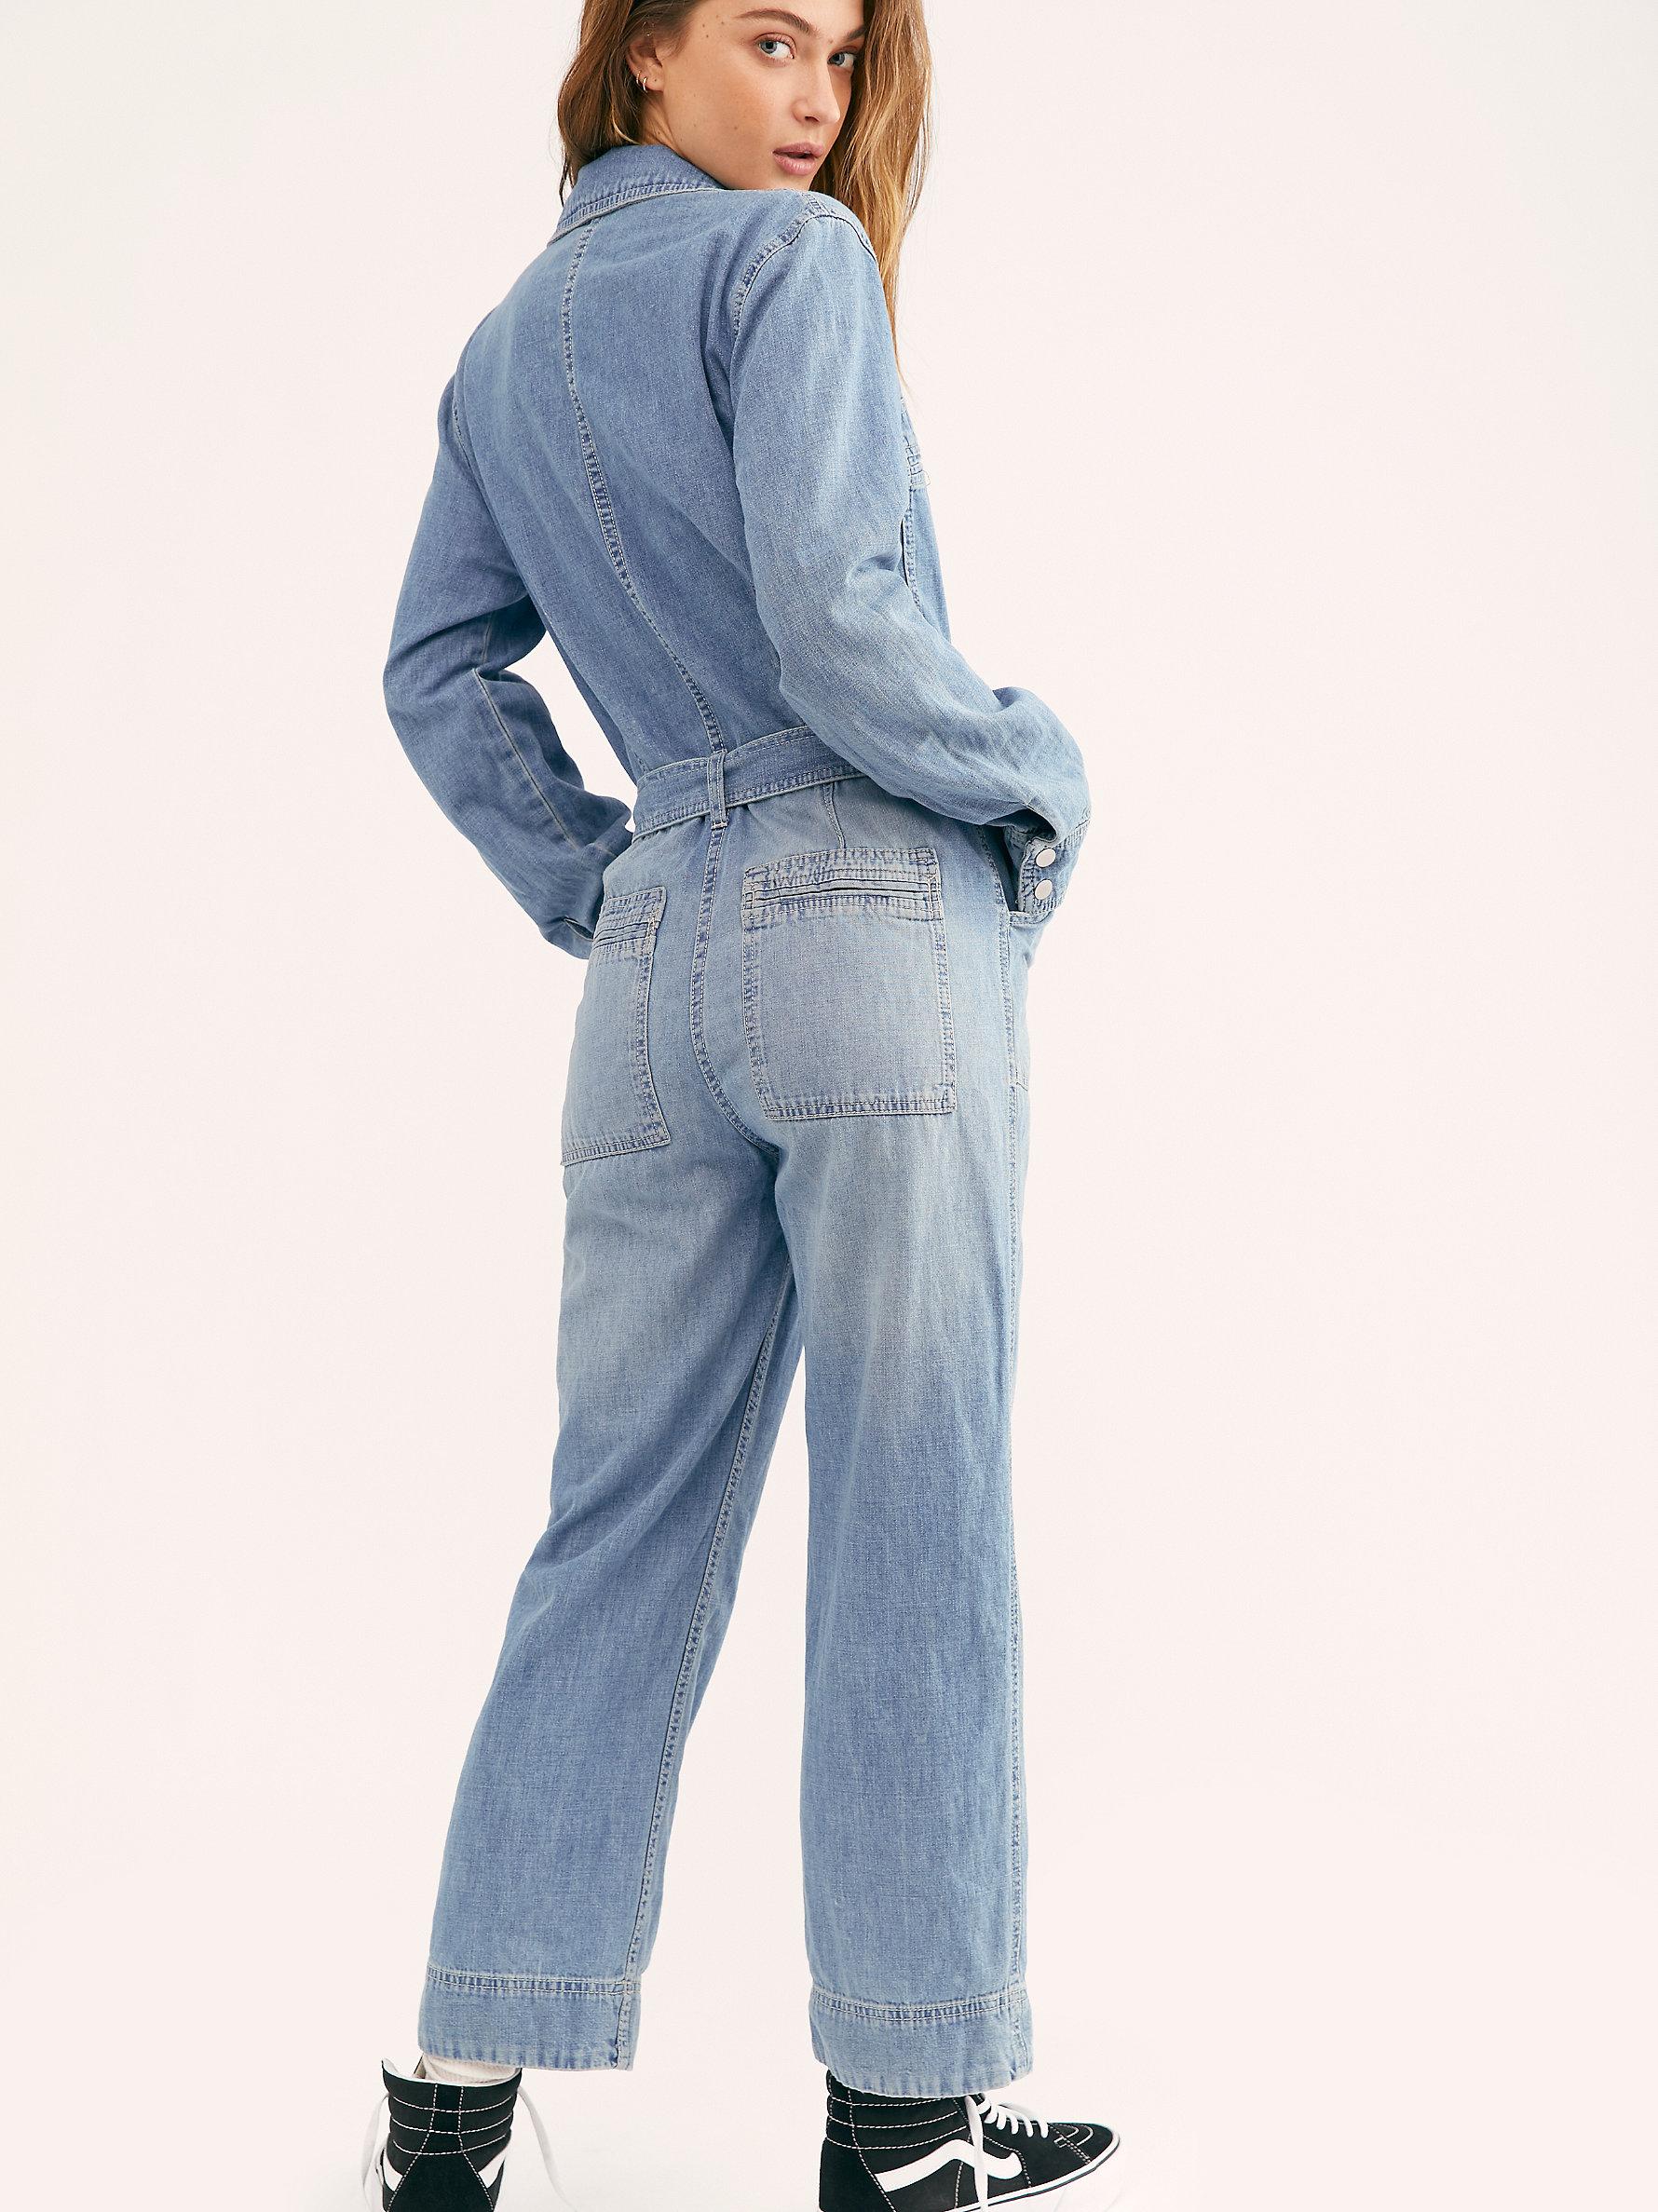 Free People Denim Charlie Coveralls in Blue | Lyst